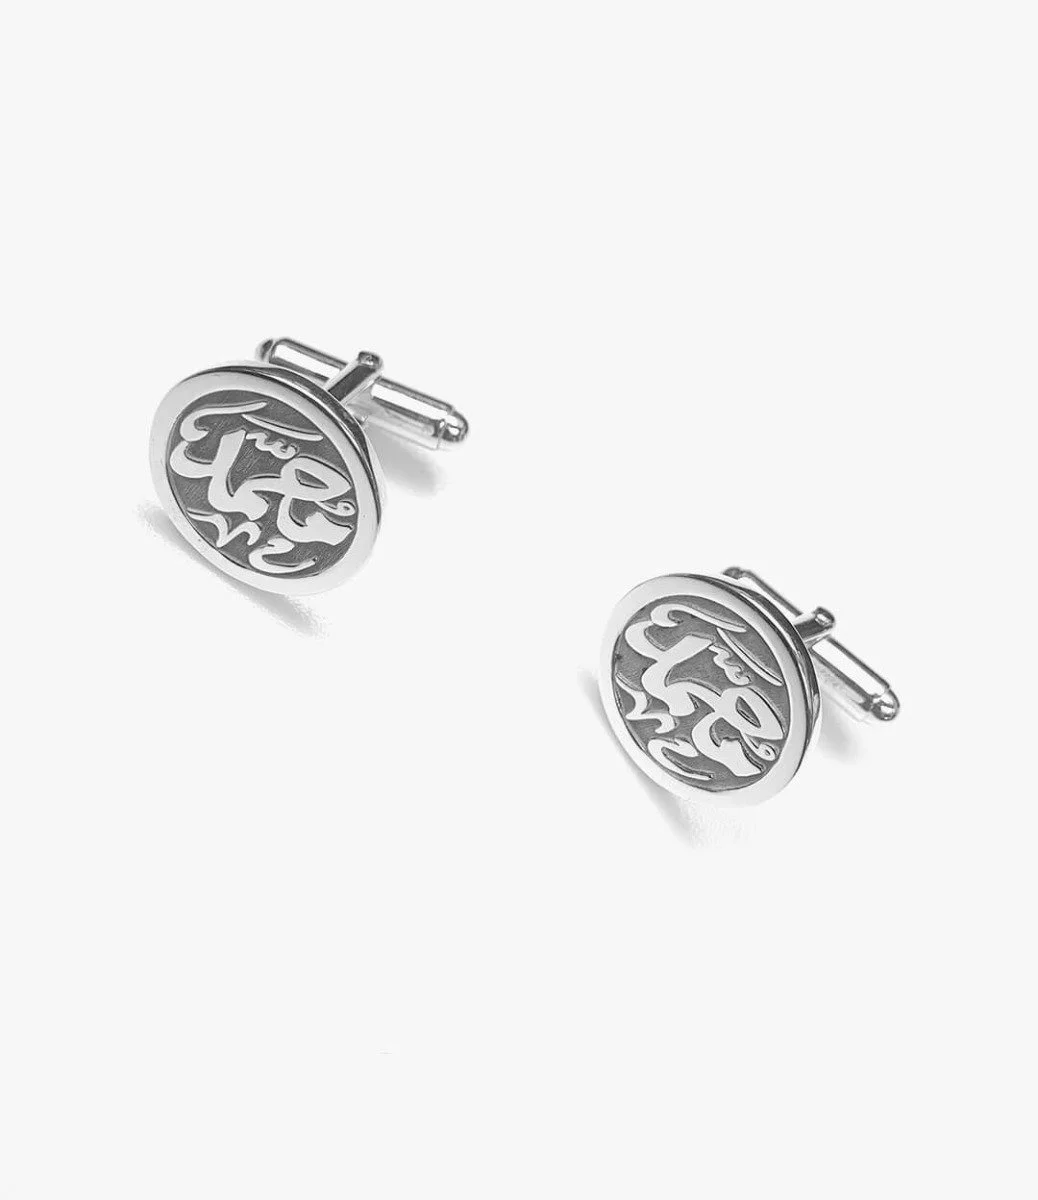 Customized One Name Silver Cufflinks